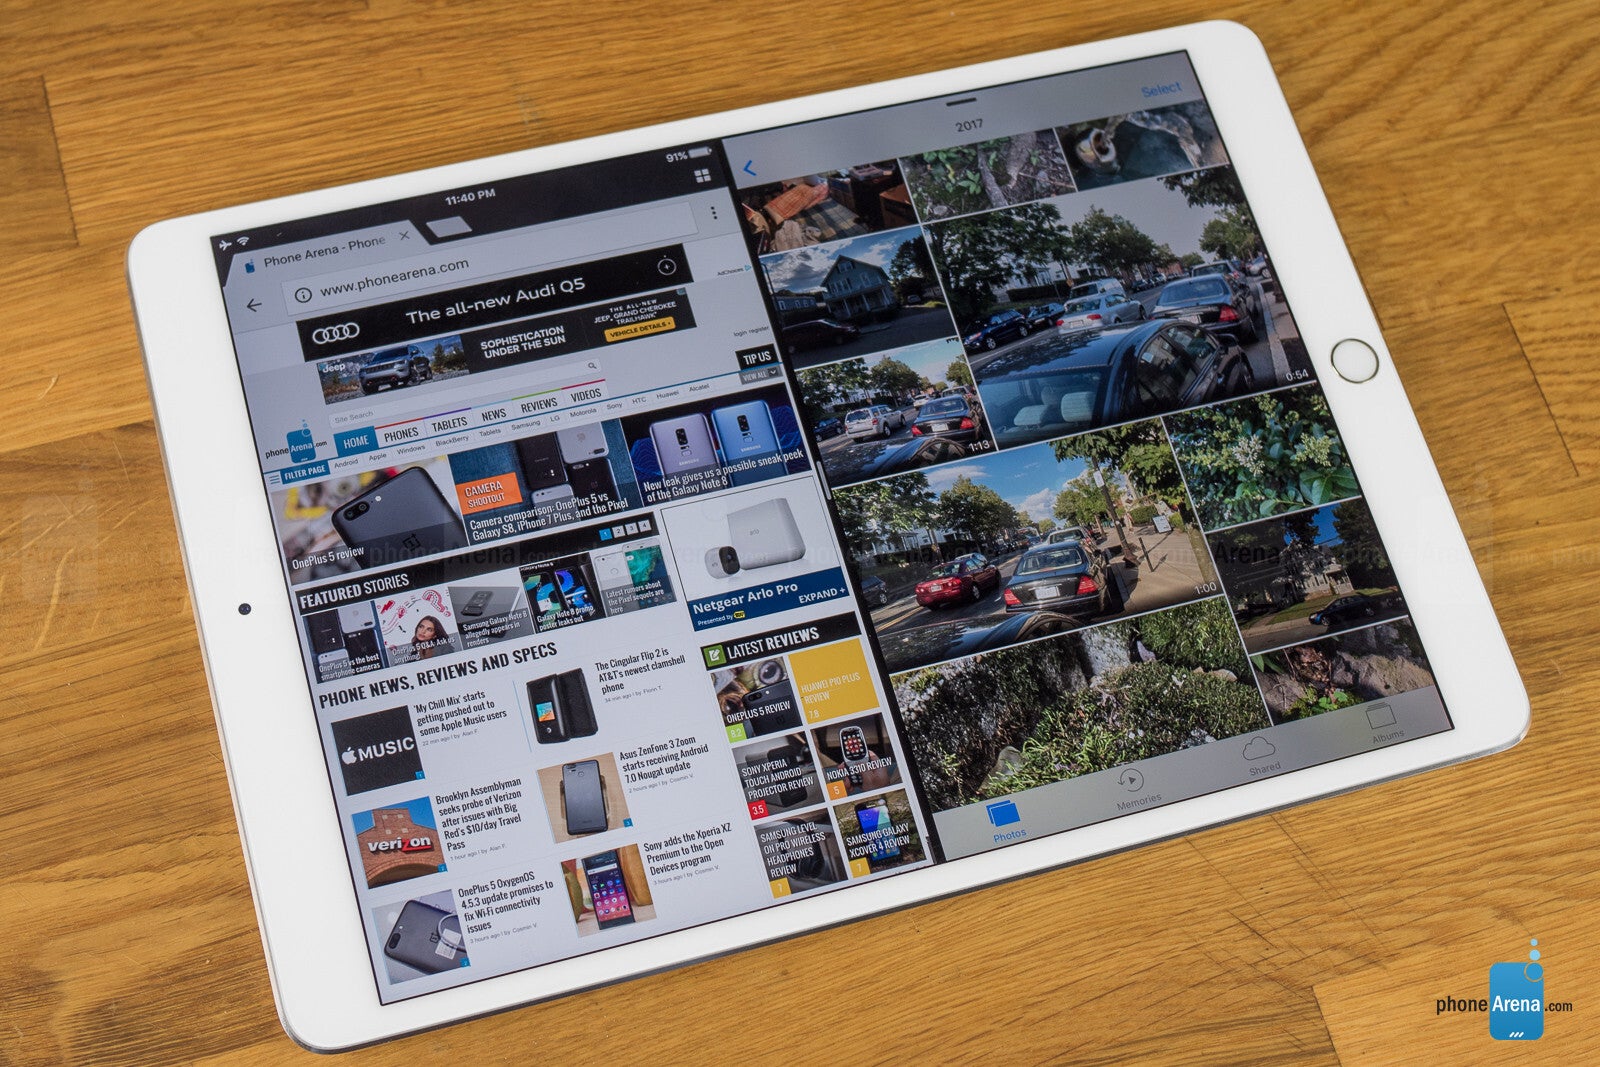 iPad Pro 10.5 (2017) - iPad 10.2 review: cheap, productive, and not the one you should buy